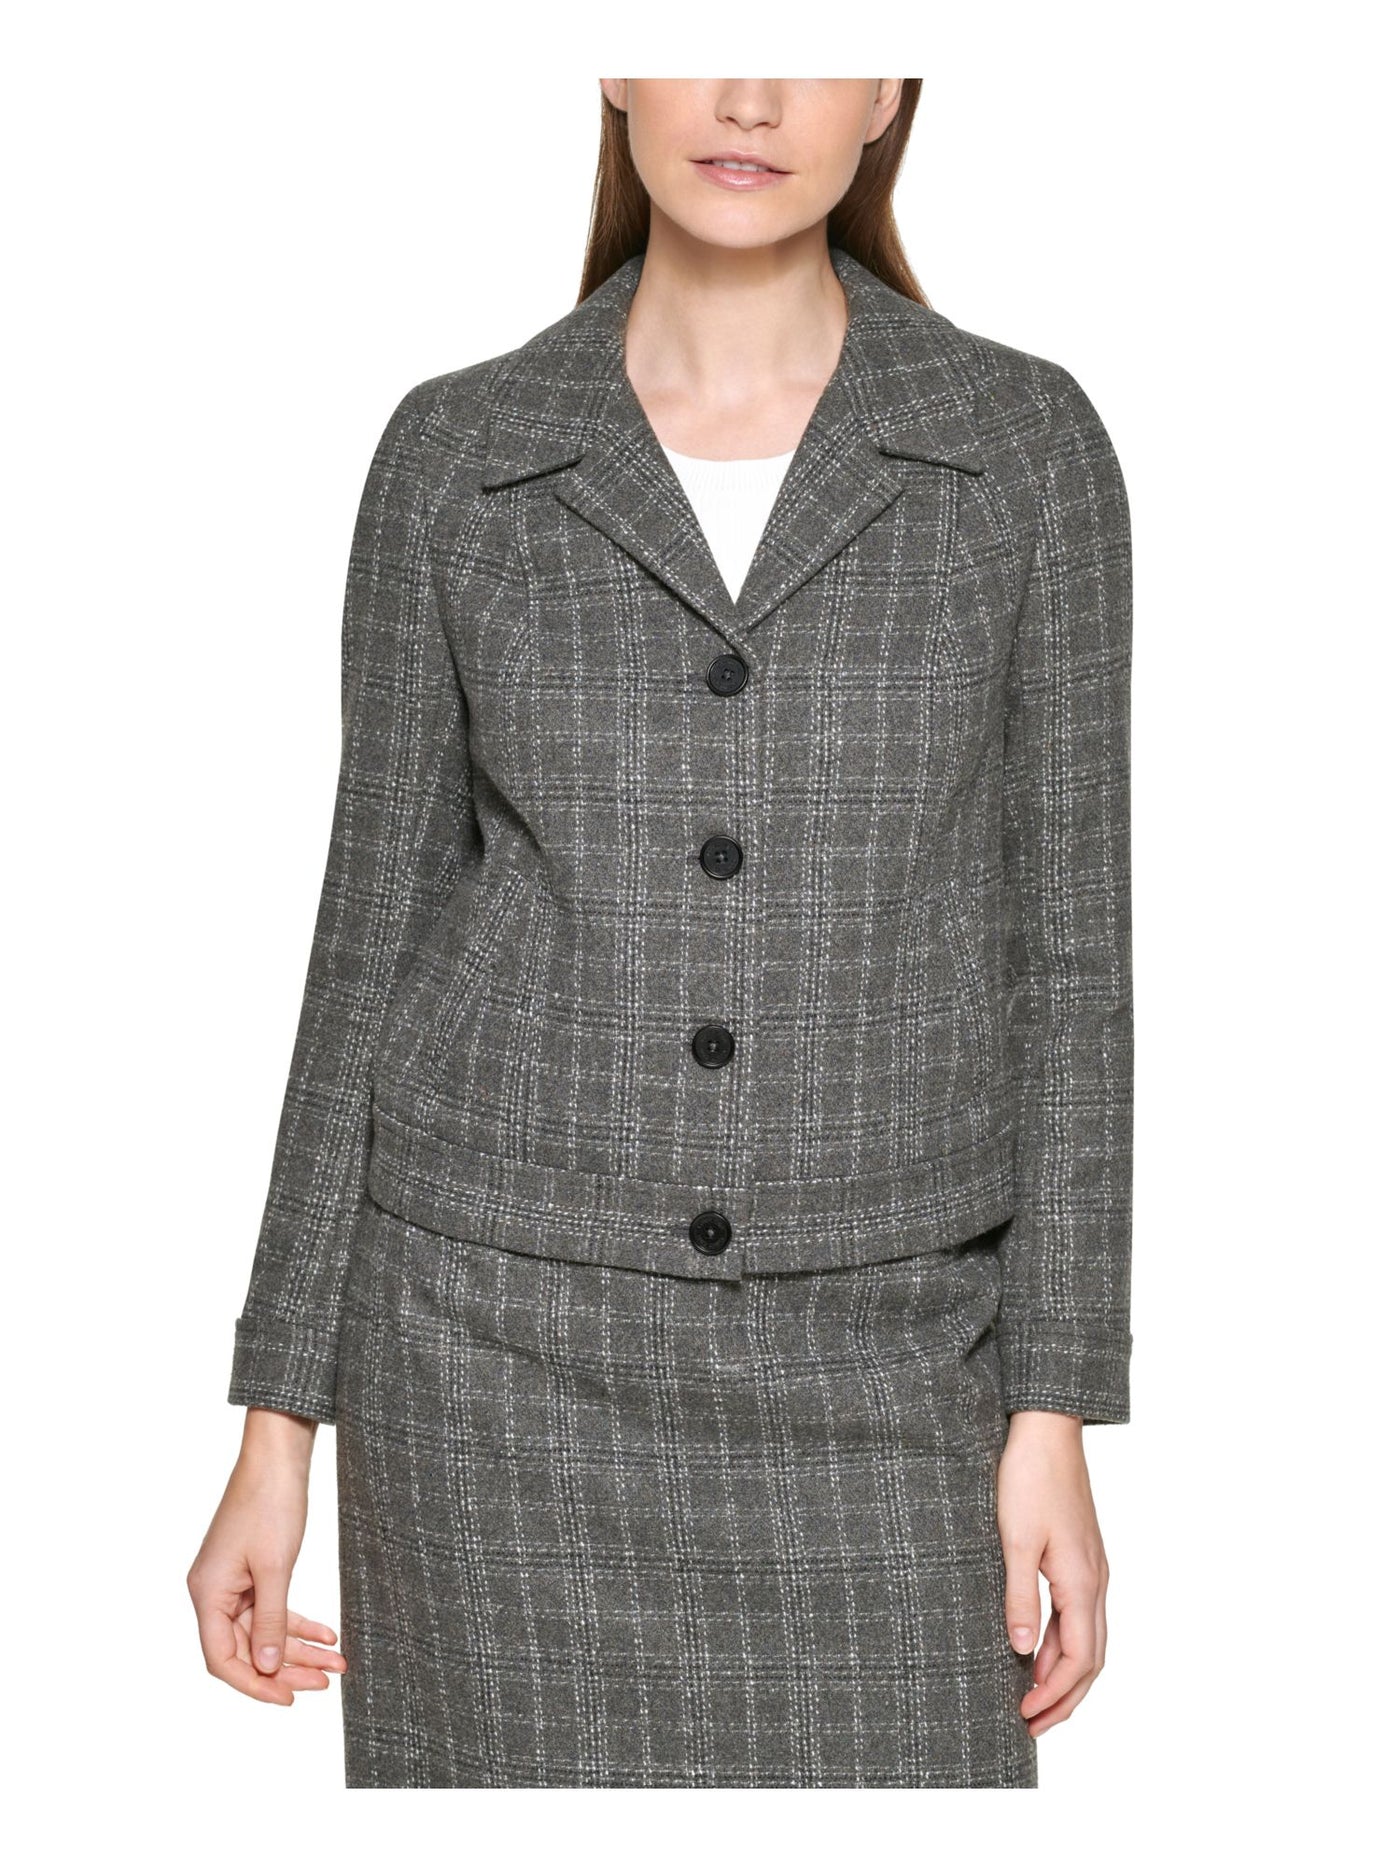 CALVIN KLEIN Womens Gray Pocketed Darted Lined Button Front Plaid Long Sleeve Collared Wear To Work Blazer Jacket 12